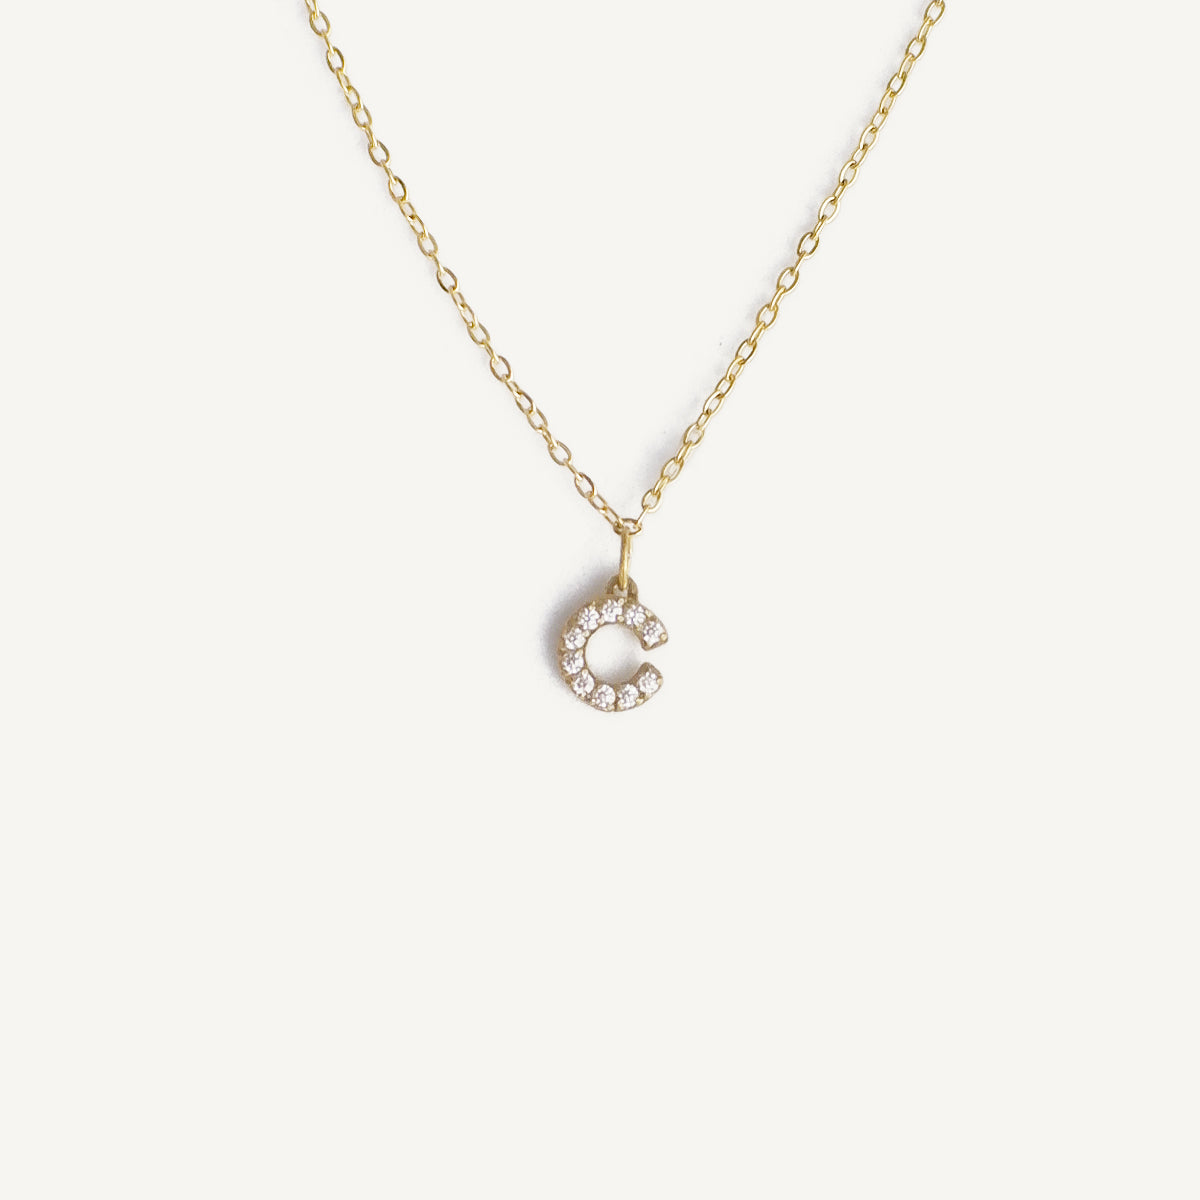 The Pave Number and Initial Add-on Charm